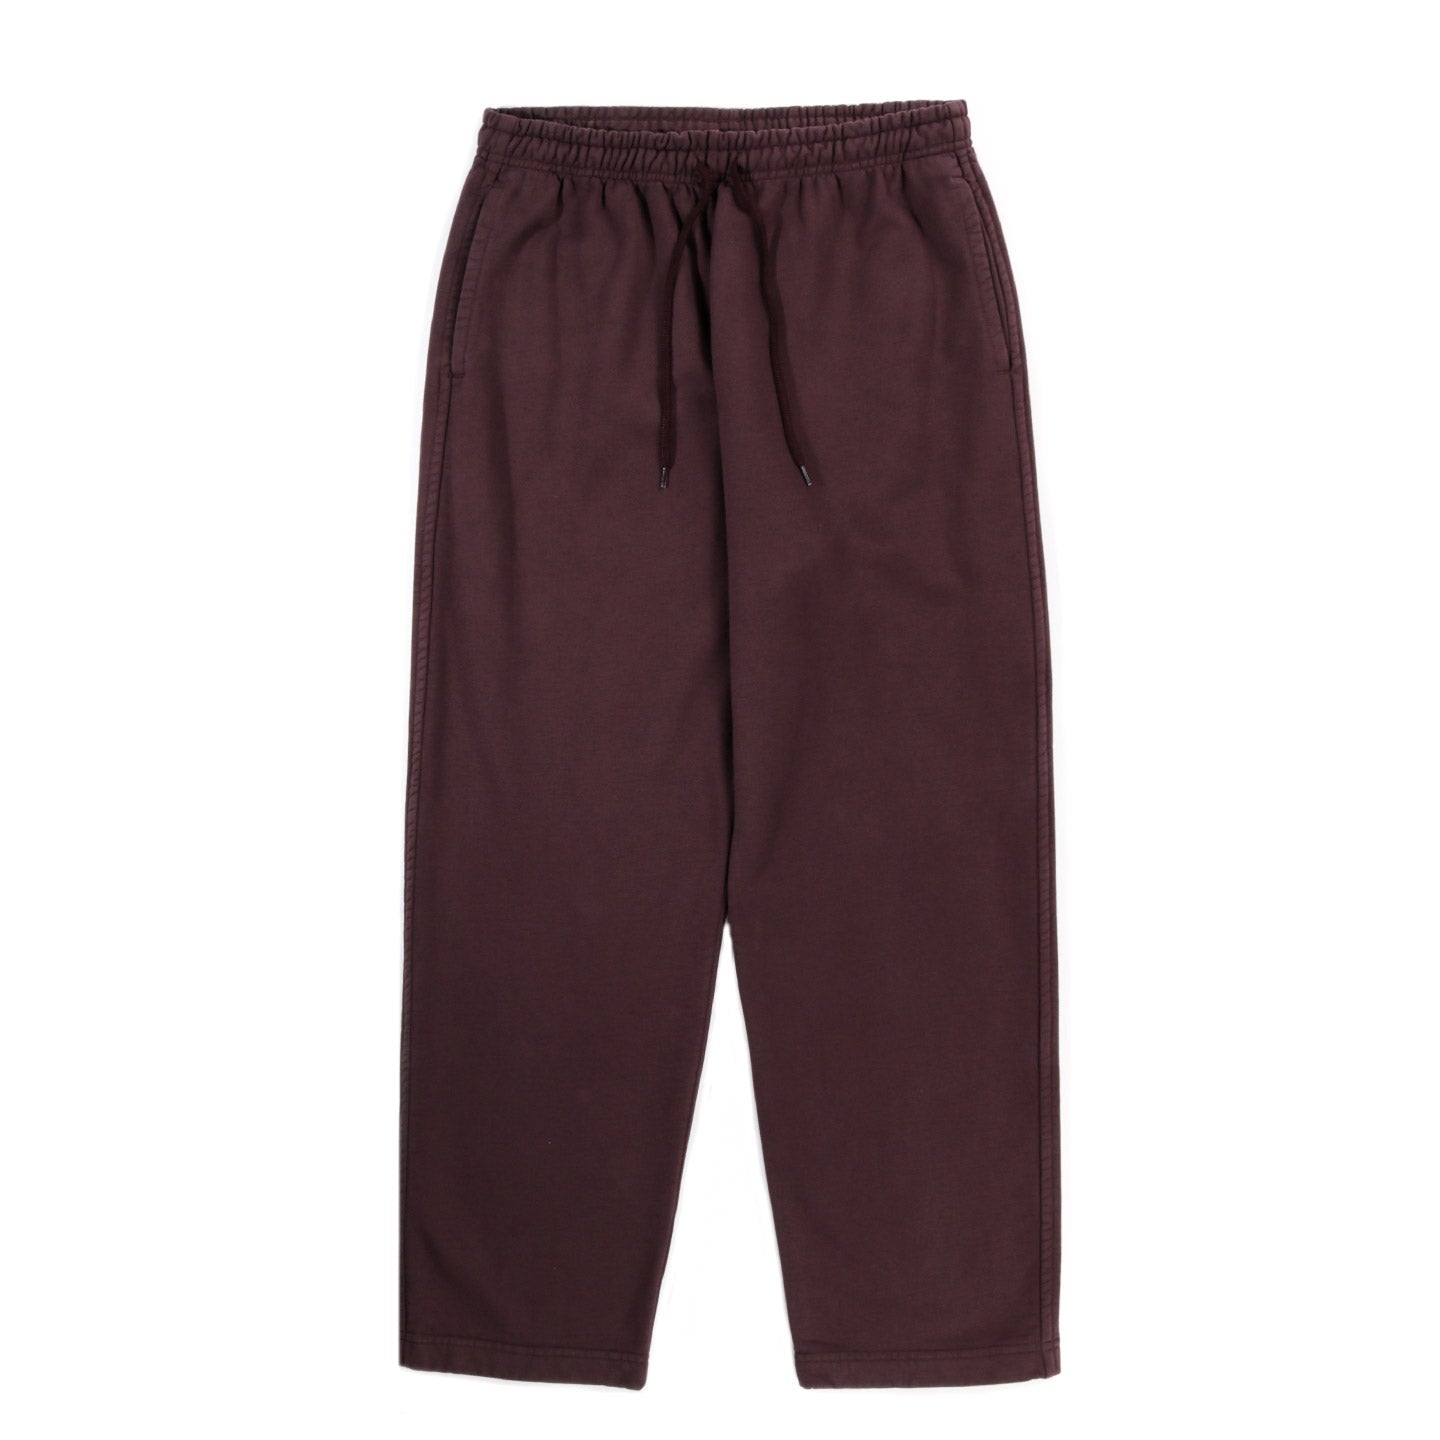 LADY WHITE CO. SUPER WEIGHTED SWEATPANT RAISIN